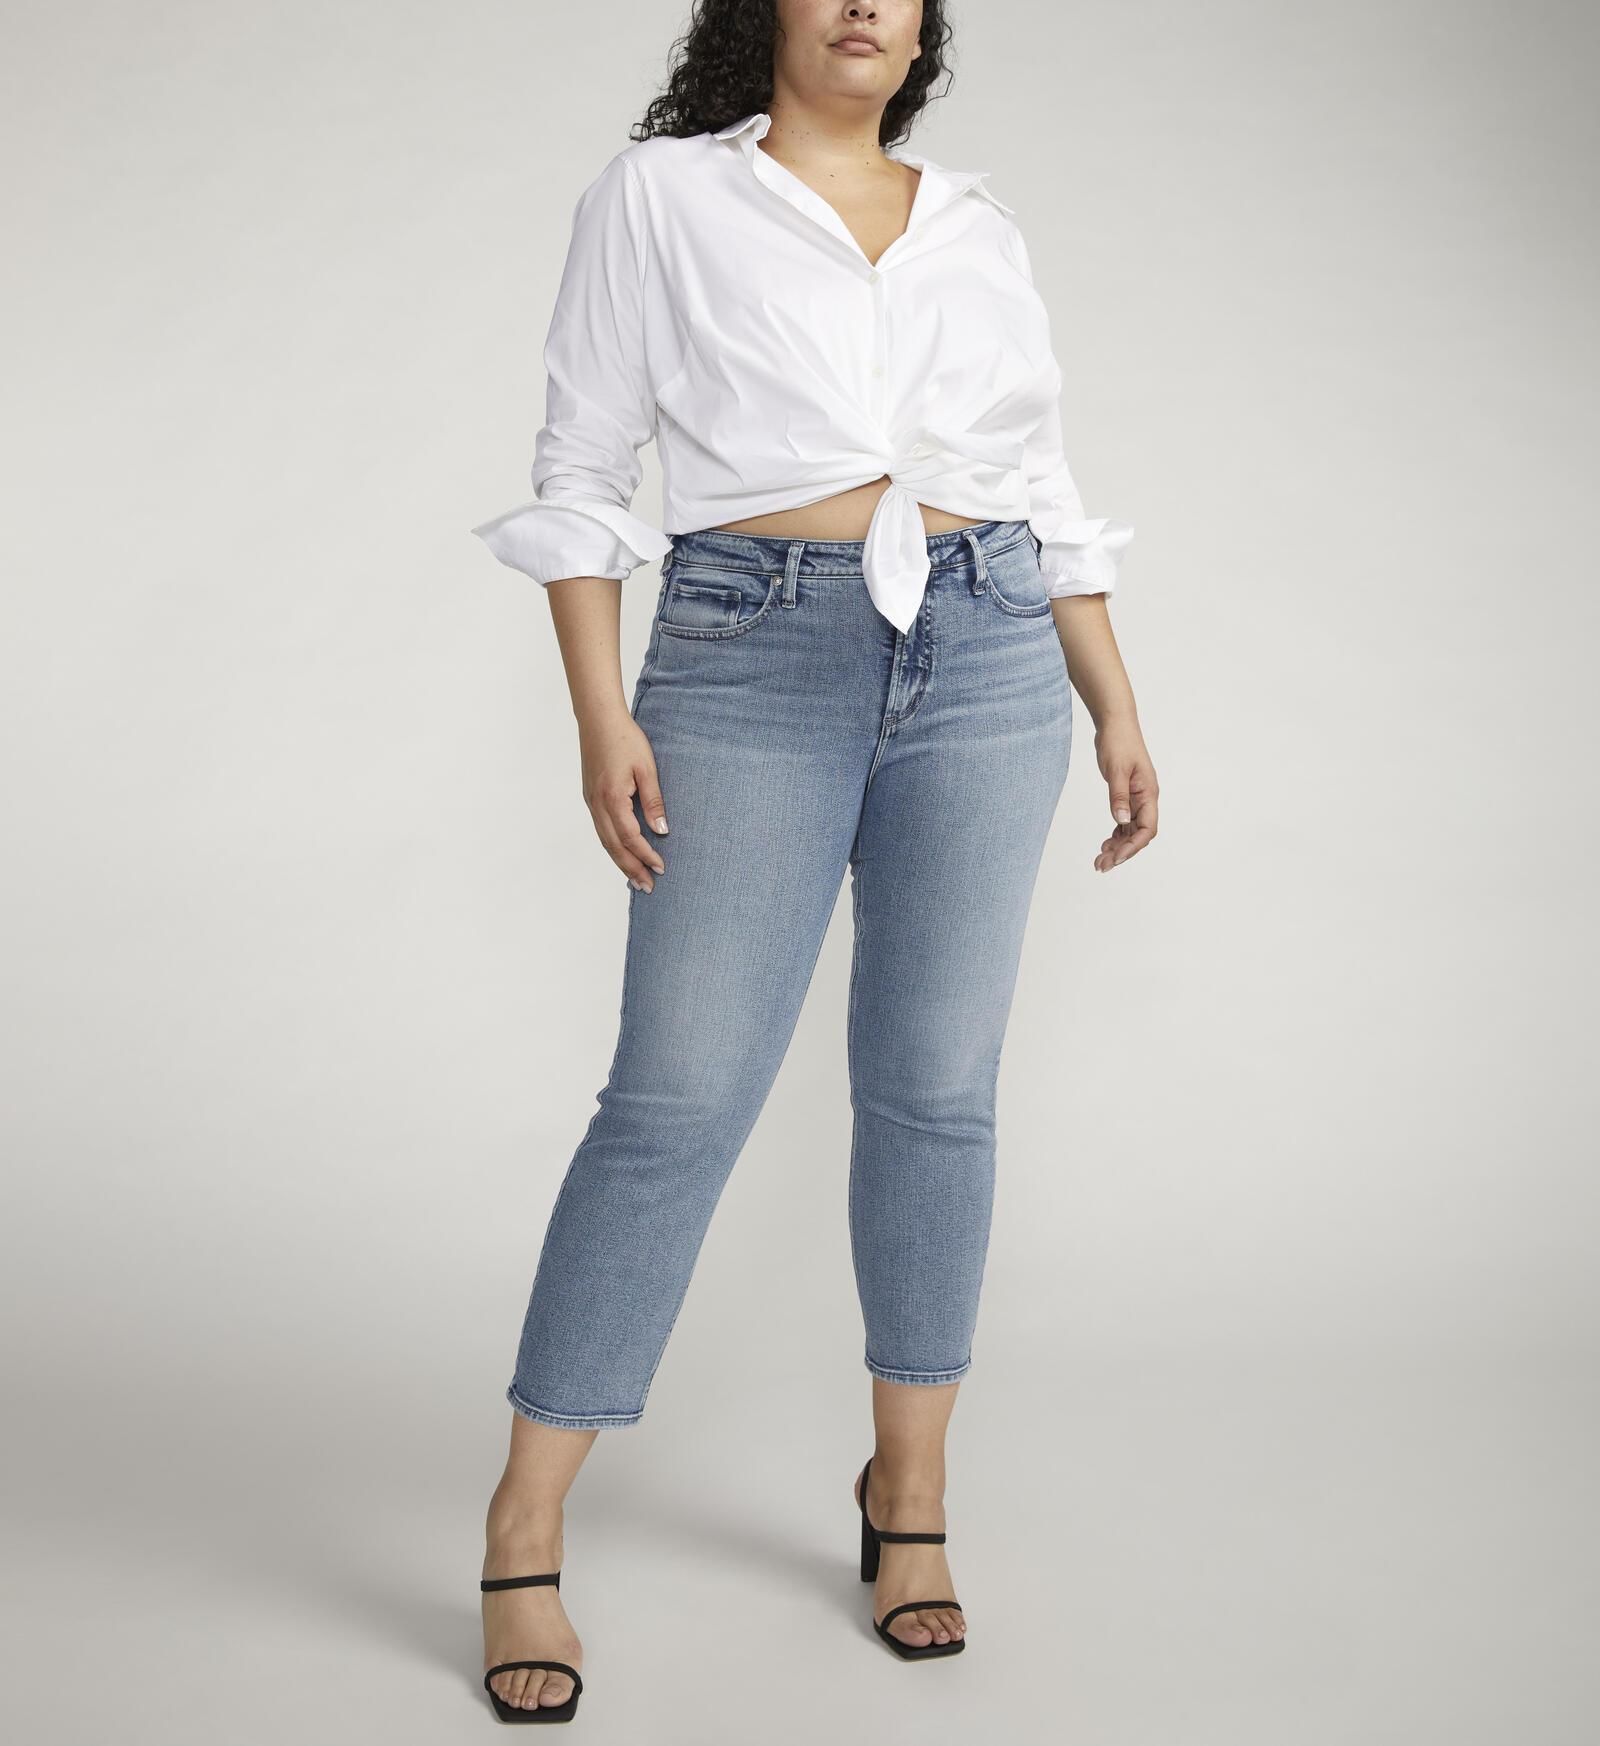 Buy Most Wanted Mid Rise Ankle Straight Leg Jeans Plus Size for